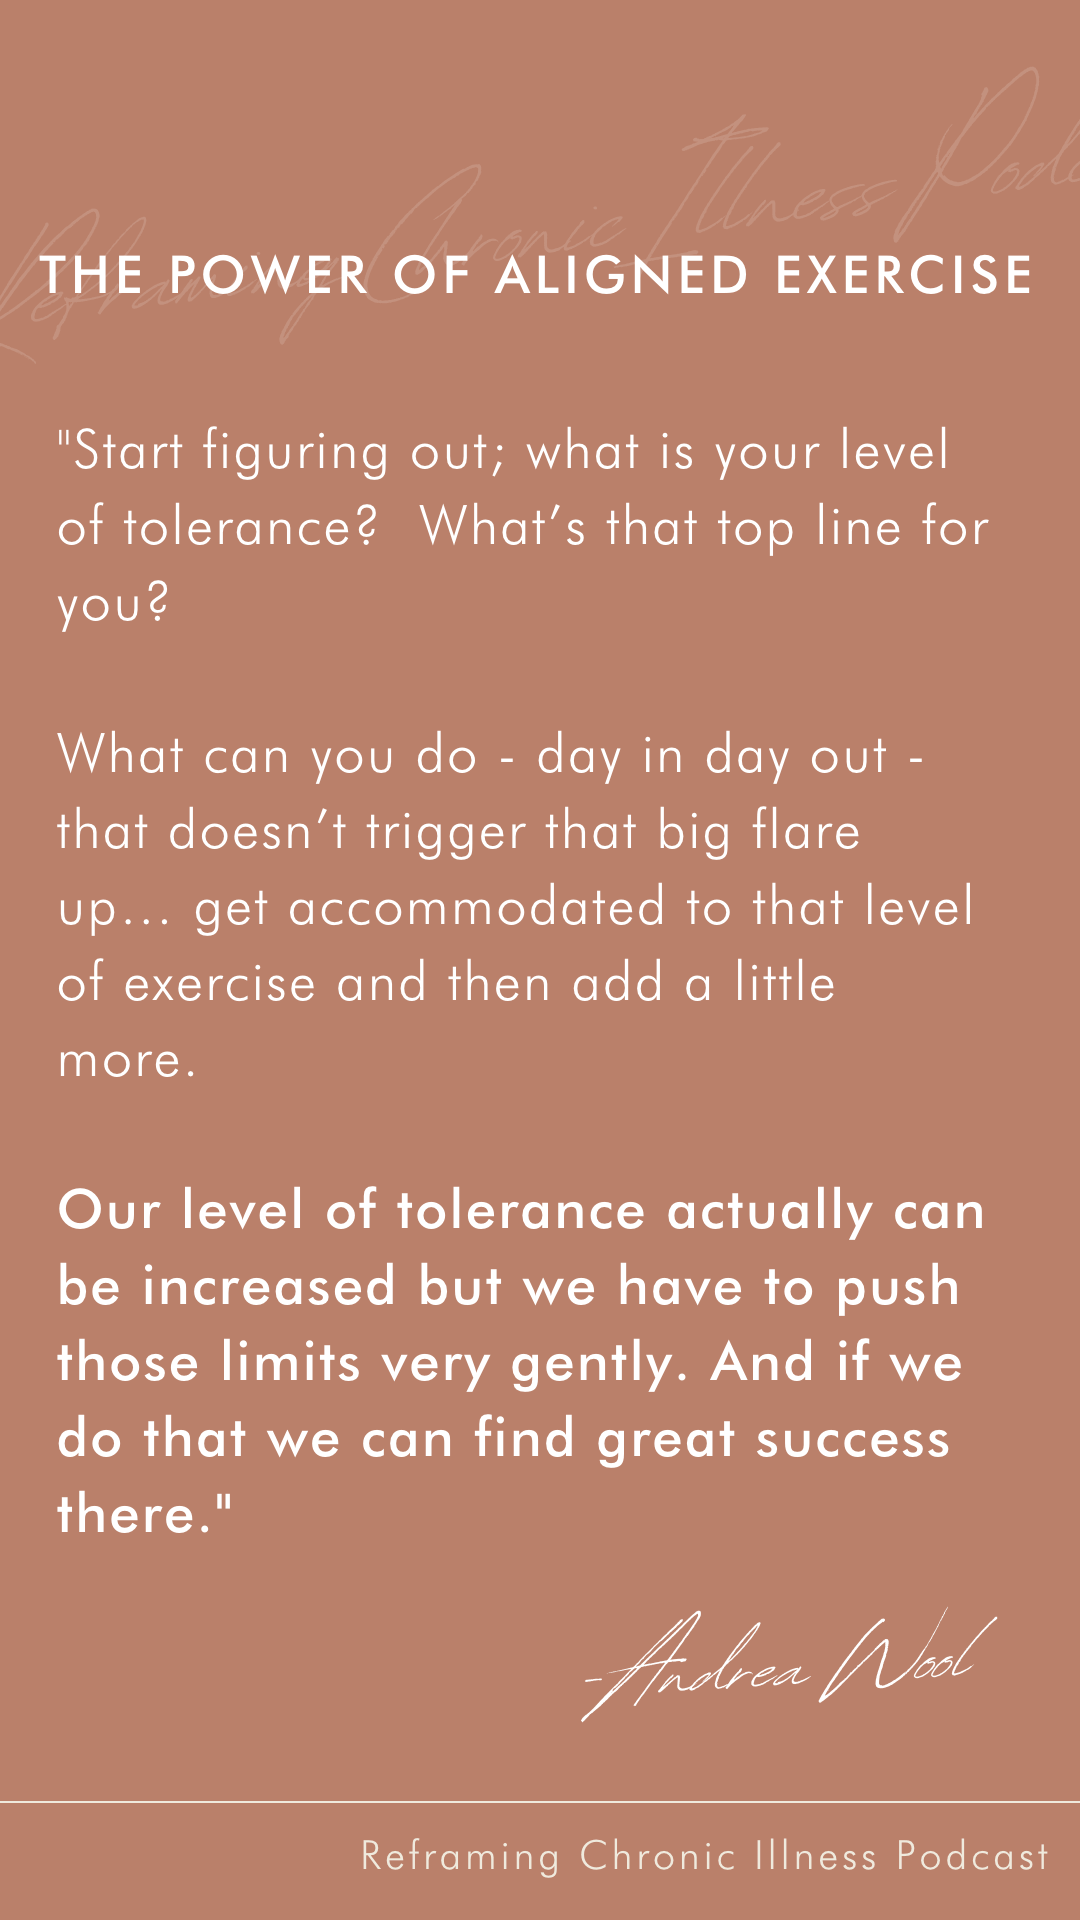 Andrea Wool Autoimmune Strong - Alana Holloway Chronic Illness Coach - Reframing Chronic Illness Podcast - The Power of Aligned Exercise2.png